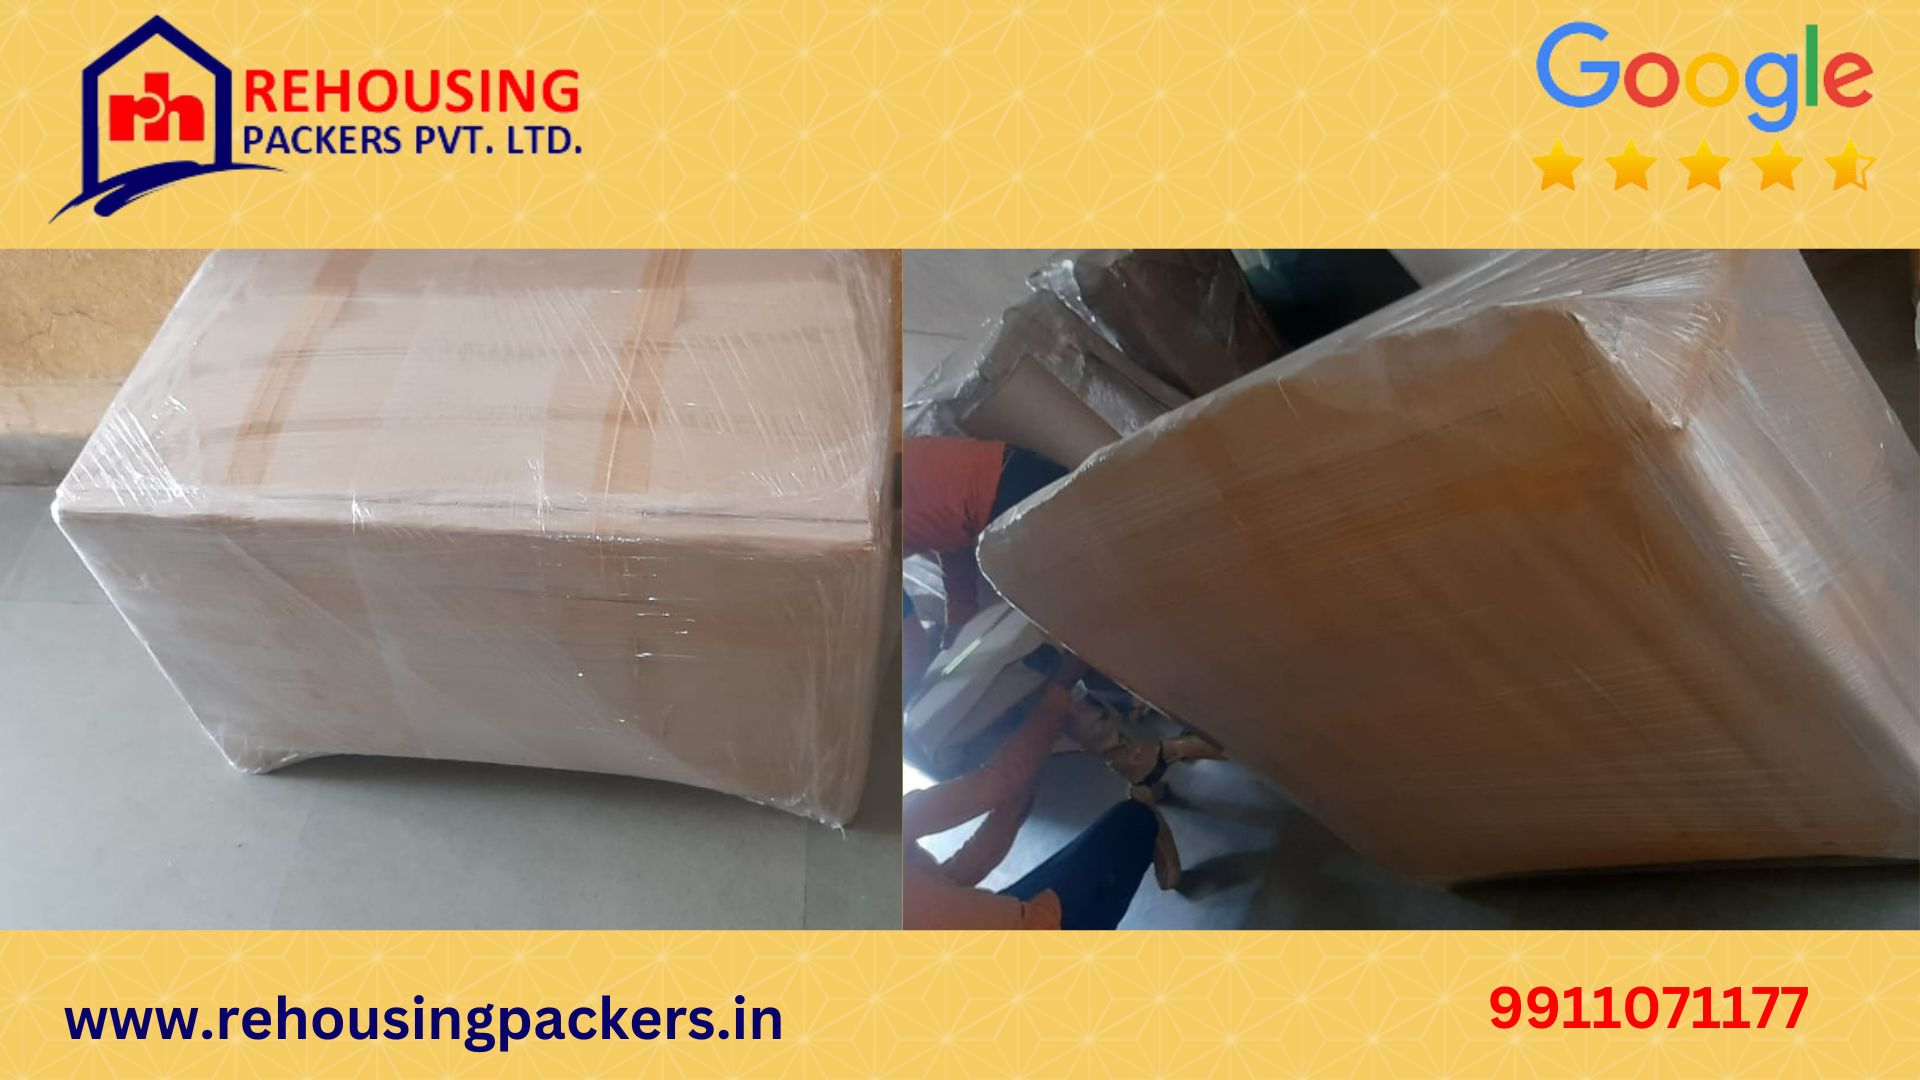 our courier services from Bhubaneswar to Kolkata